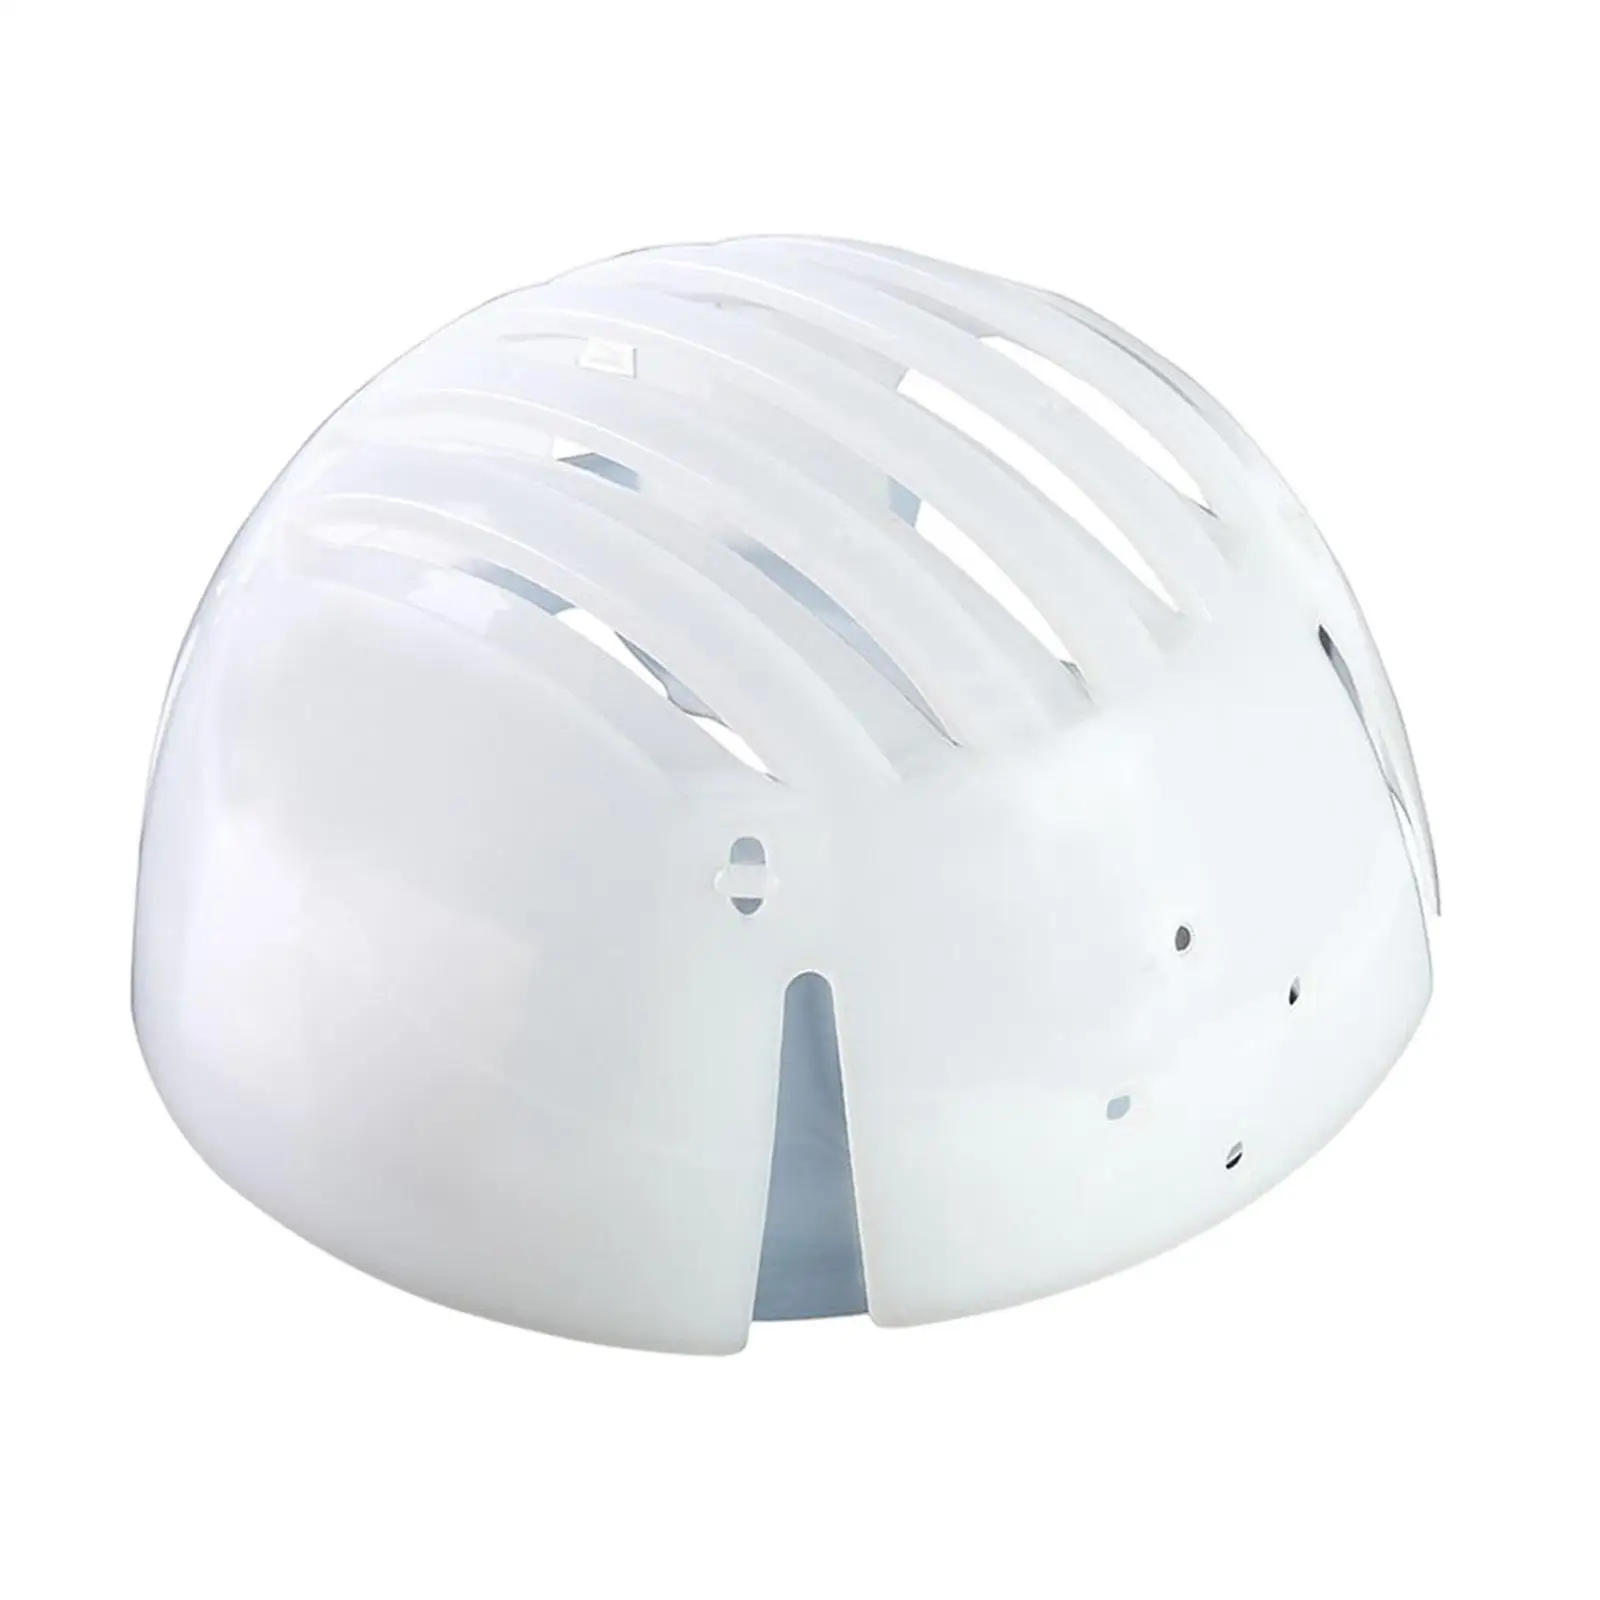 Portable Safety Helmet Protective Hat Lining Lightweight Prevent Collision Head Protection Bumper Hat Insert for Factory Sports